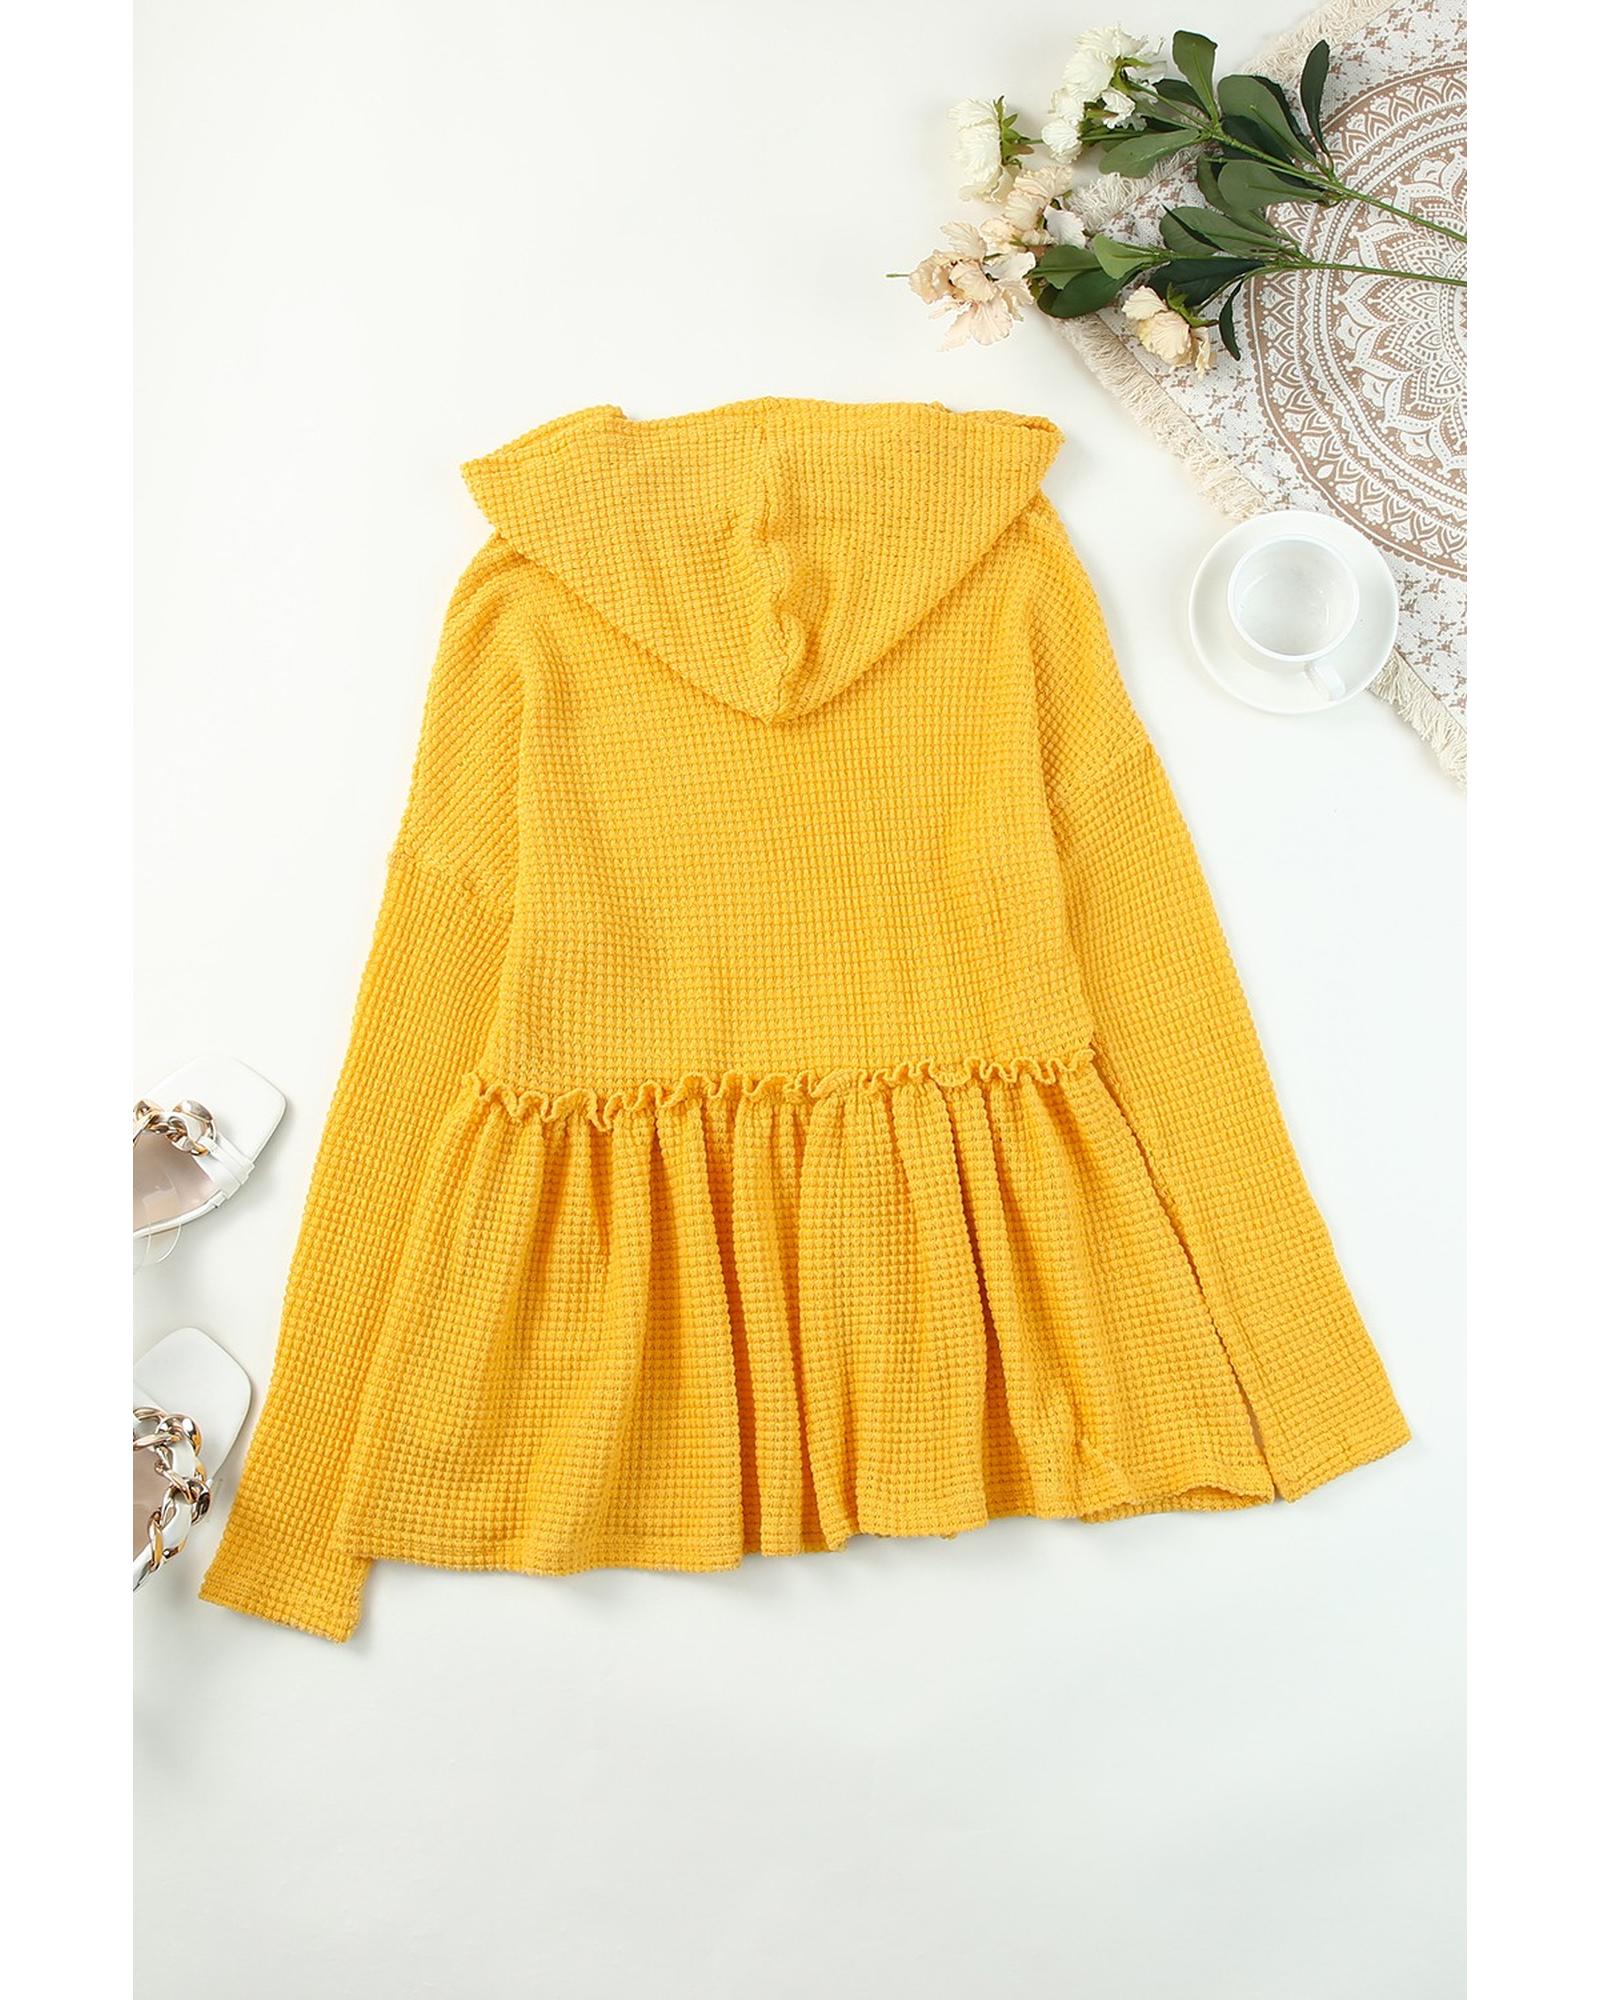 Hooded Flowy Top with Frill - M